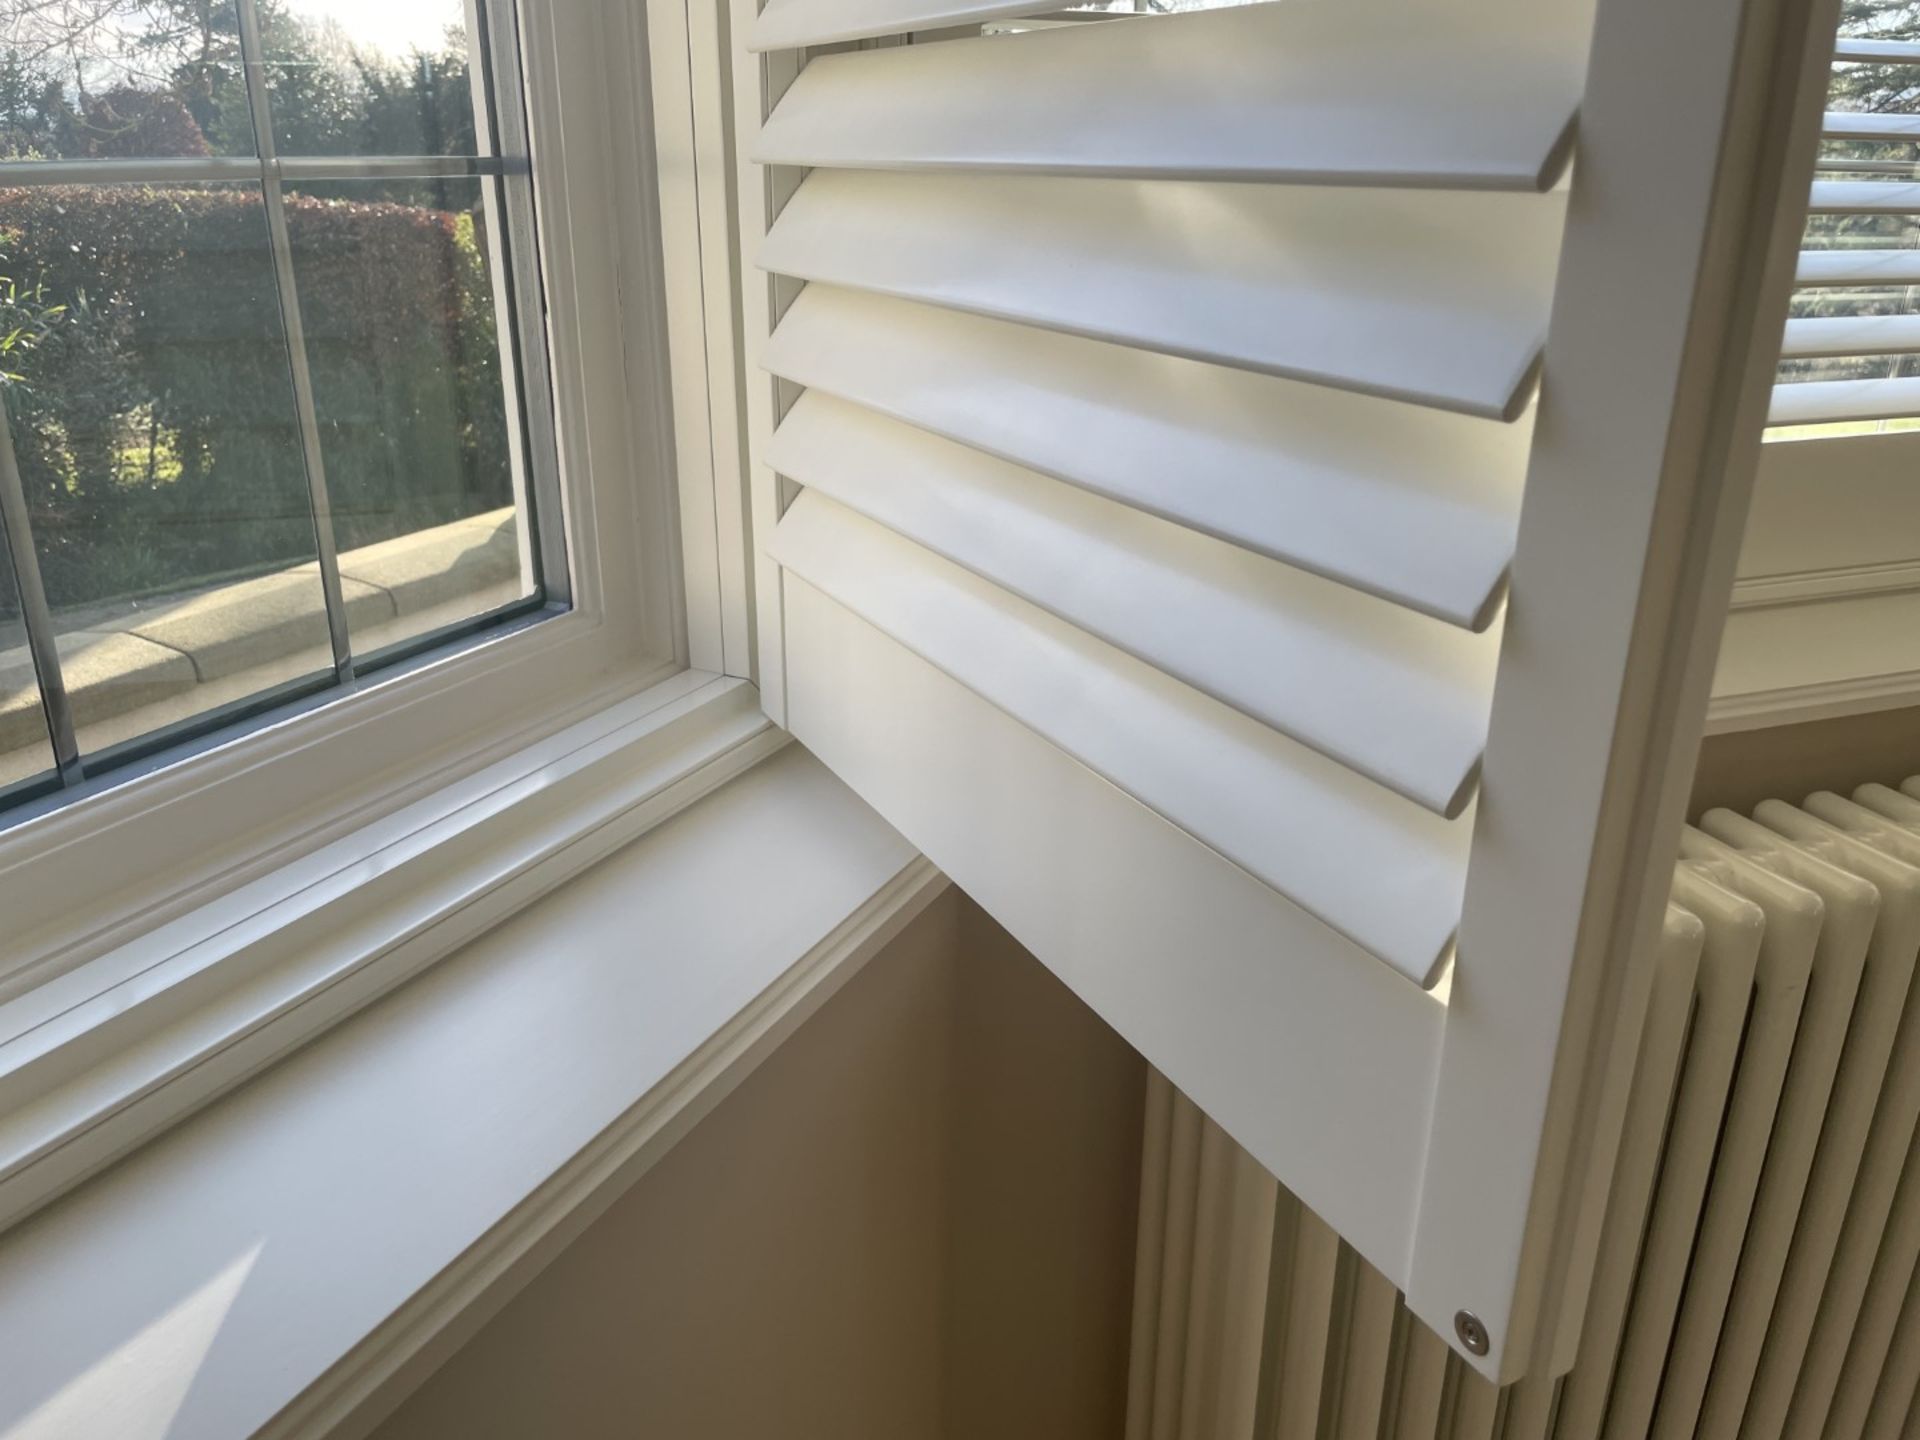 1 x Hardwood Timber Double Glazed Window Frames fitted with Shutter Blinds, In White - Ref: PAN101 - Image 5 of 23